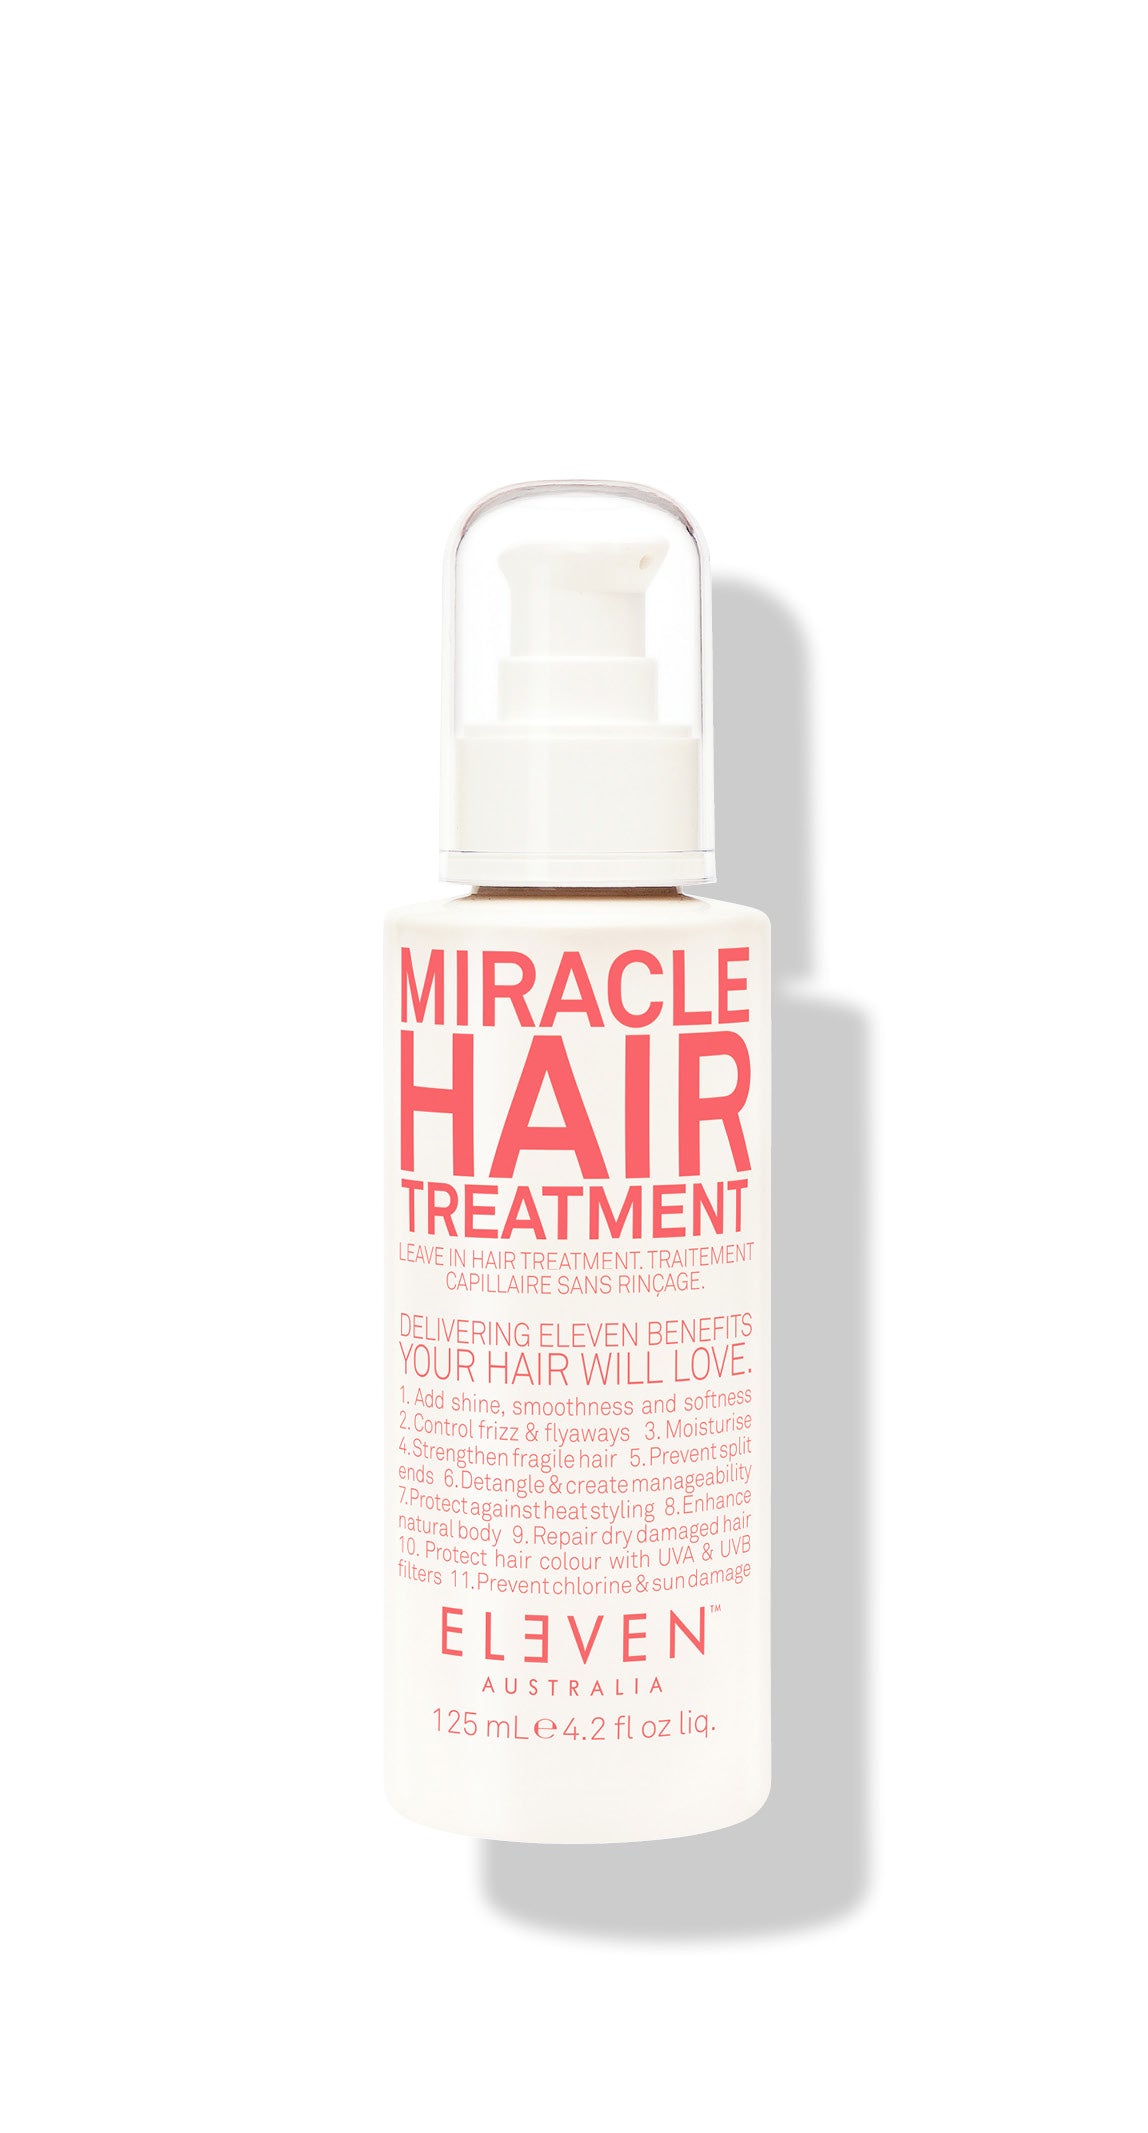 ELEVEN Australia MIRACLE Hair TREATMENT Leave In Treatment